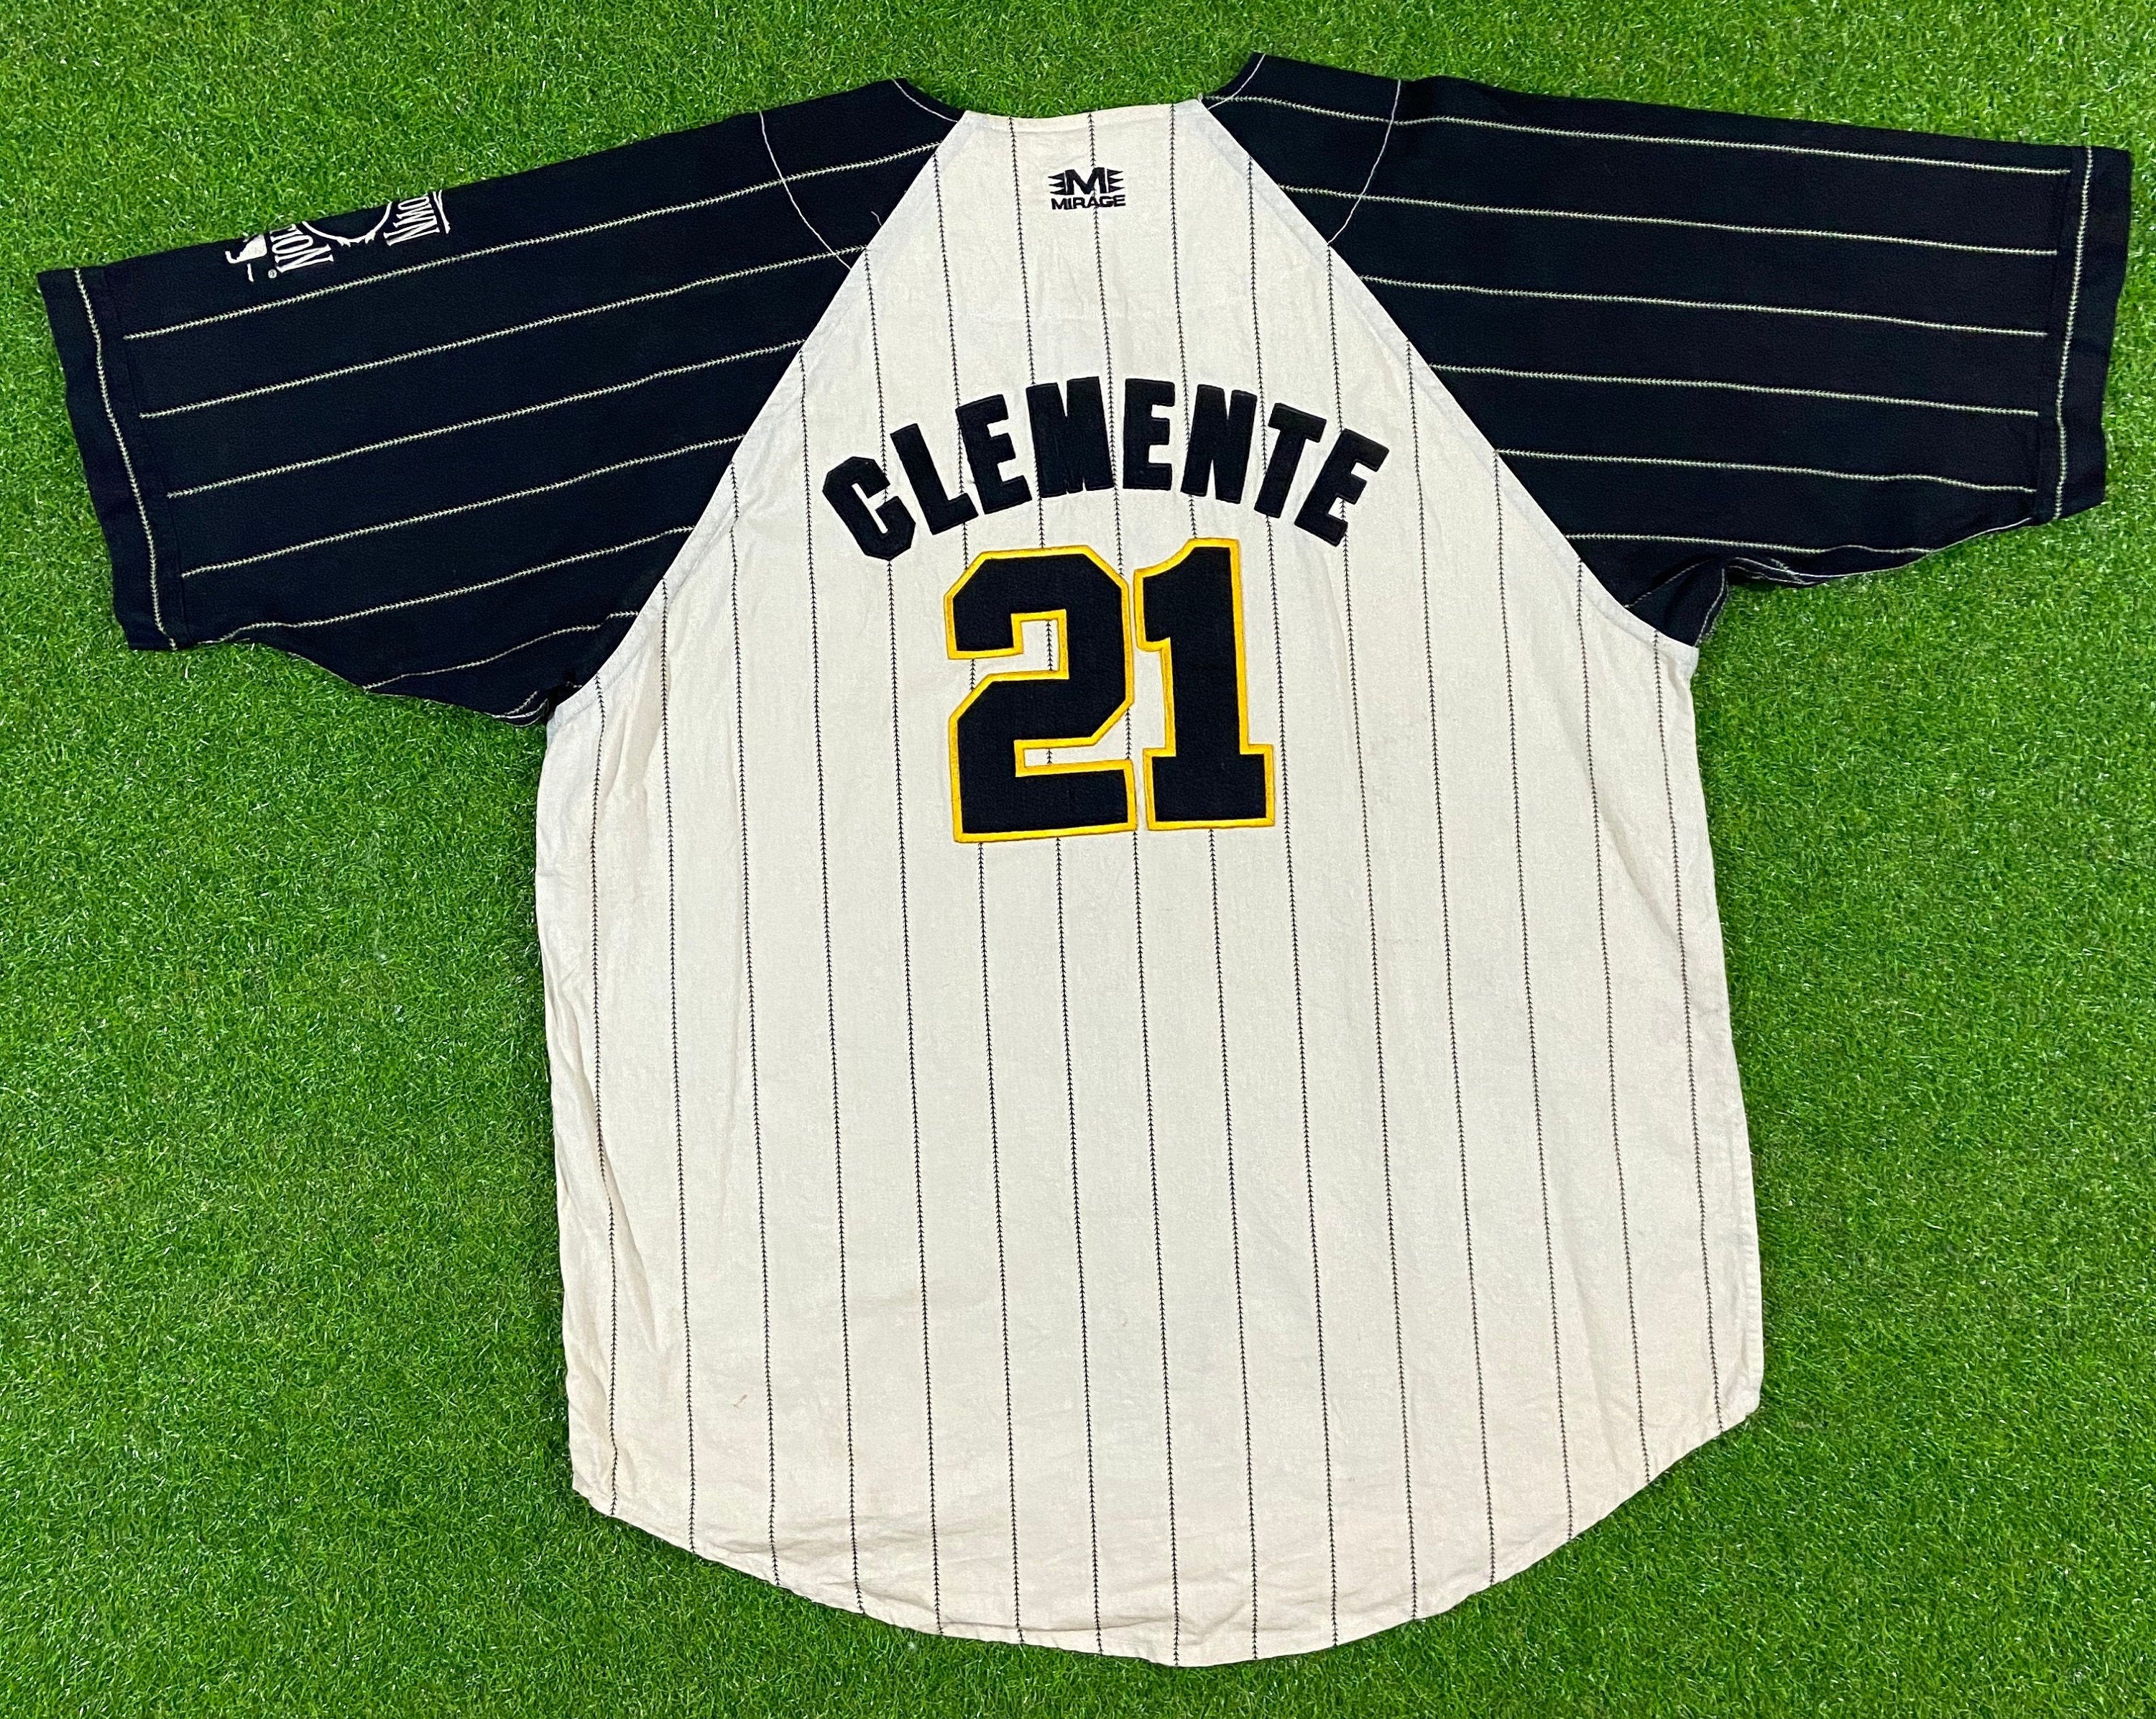 clemente throwback jersey